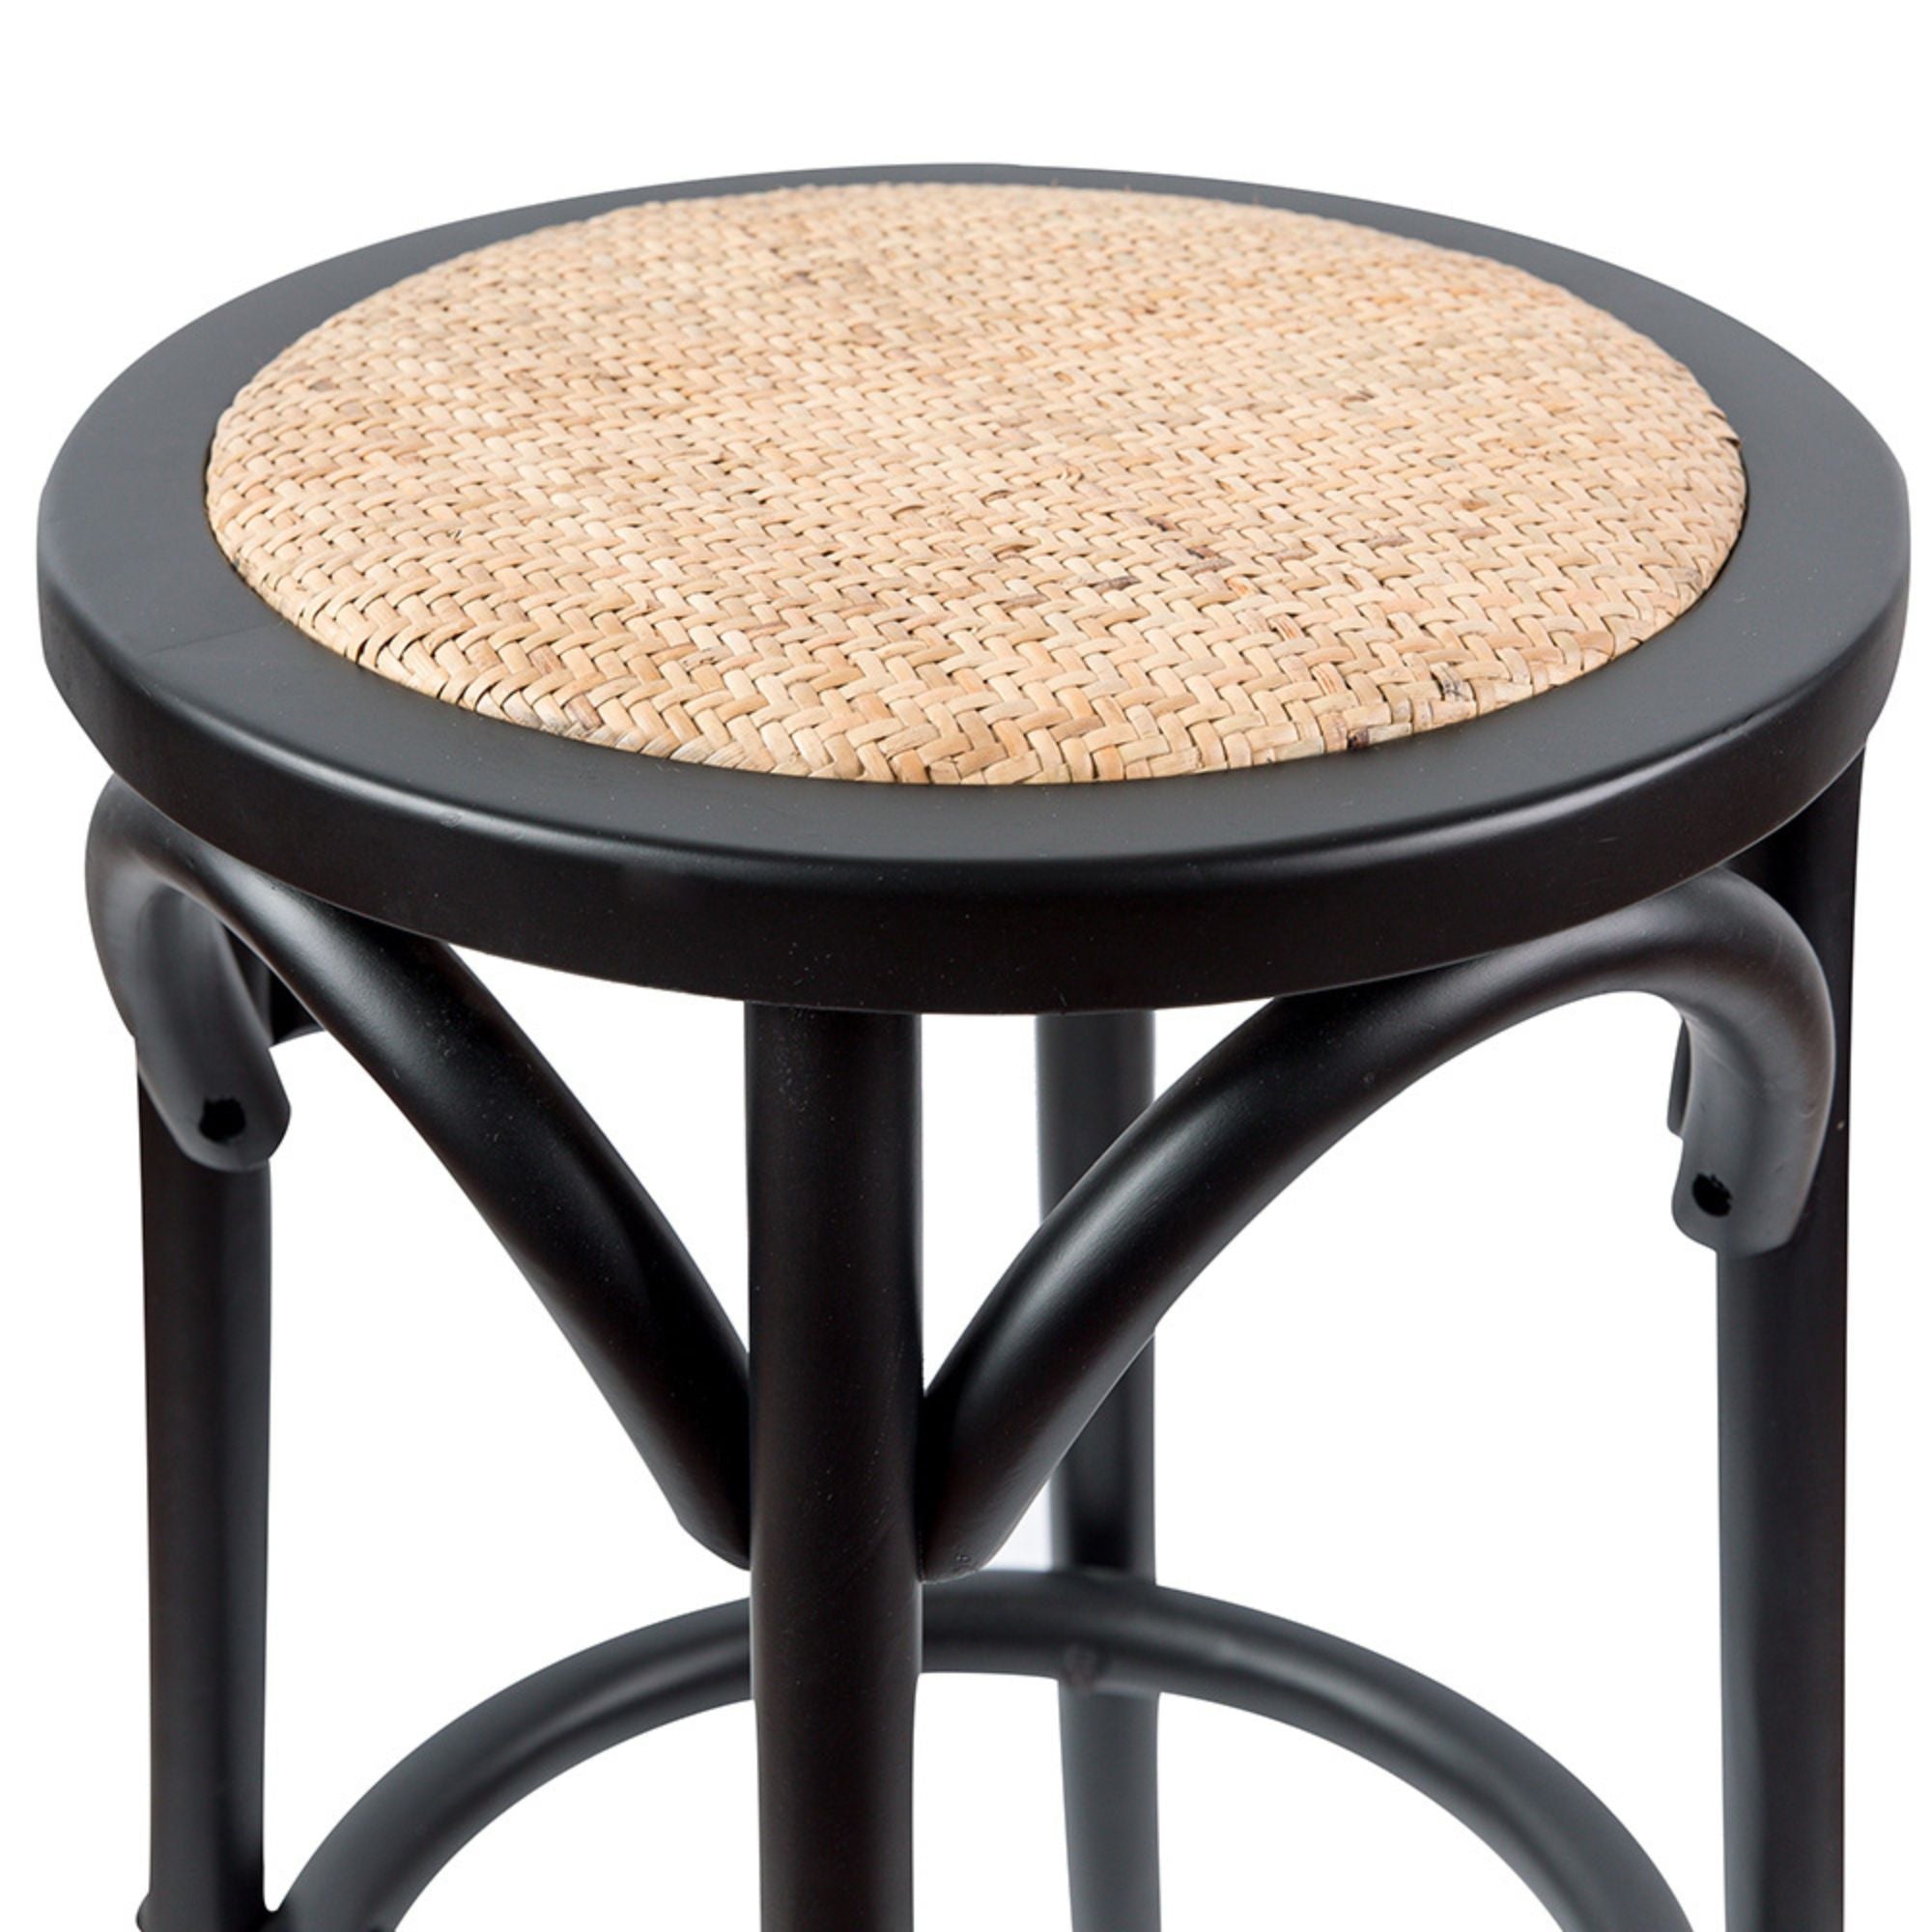 Aster 2pc Round Bar Stools Dining Stool Chair Solid Birch Wood Rattan Seat Black Deals499